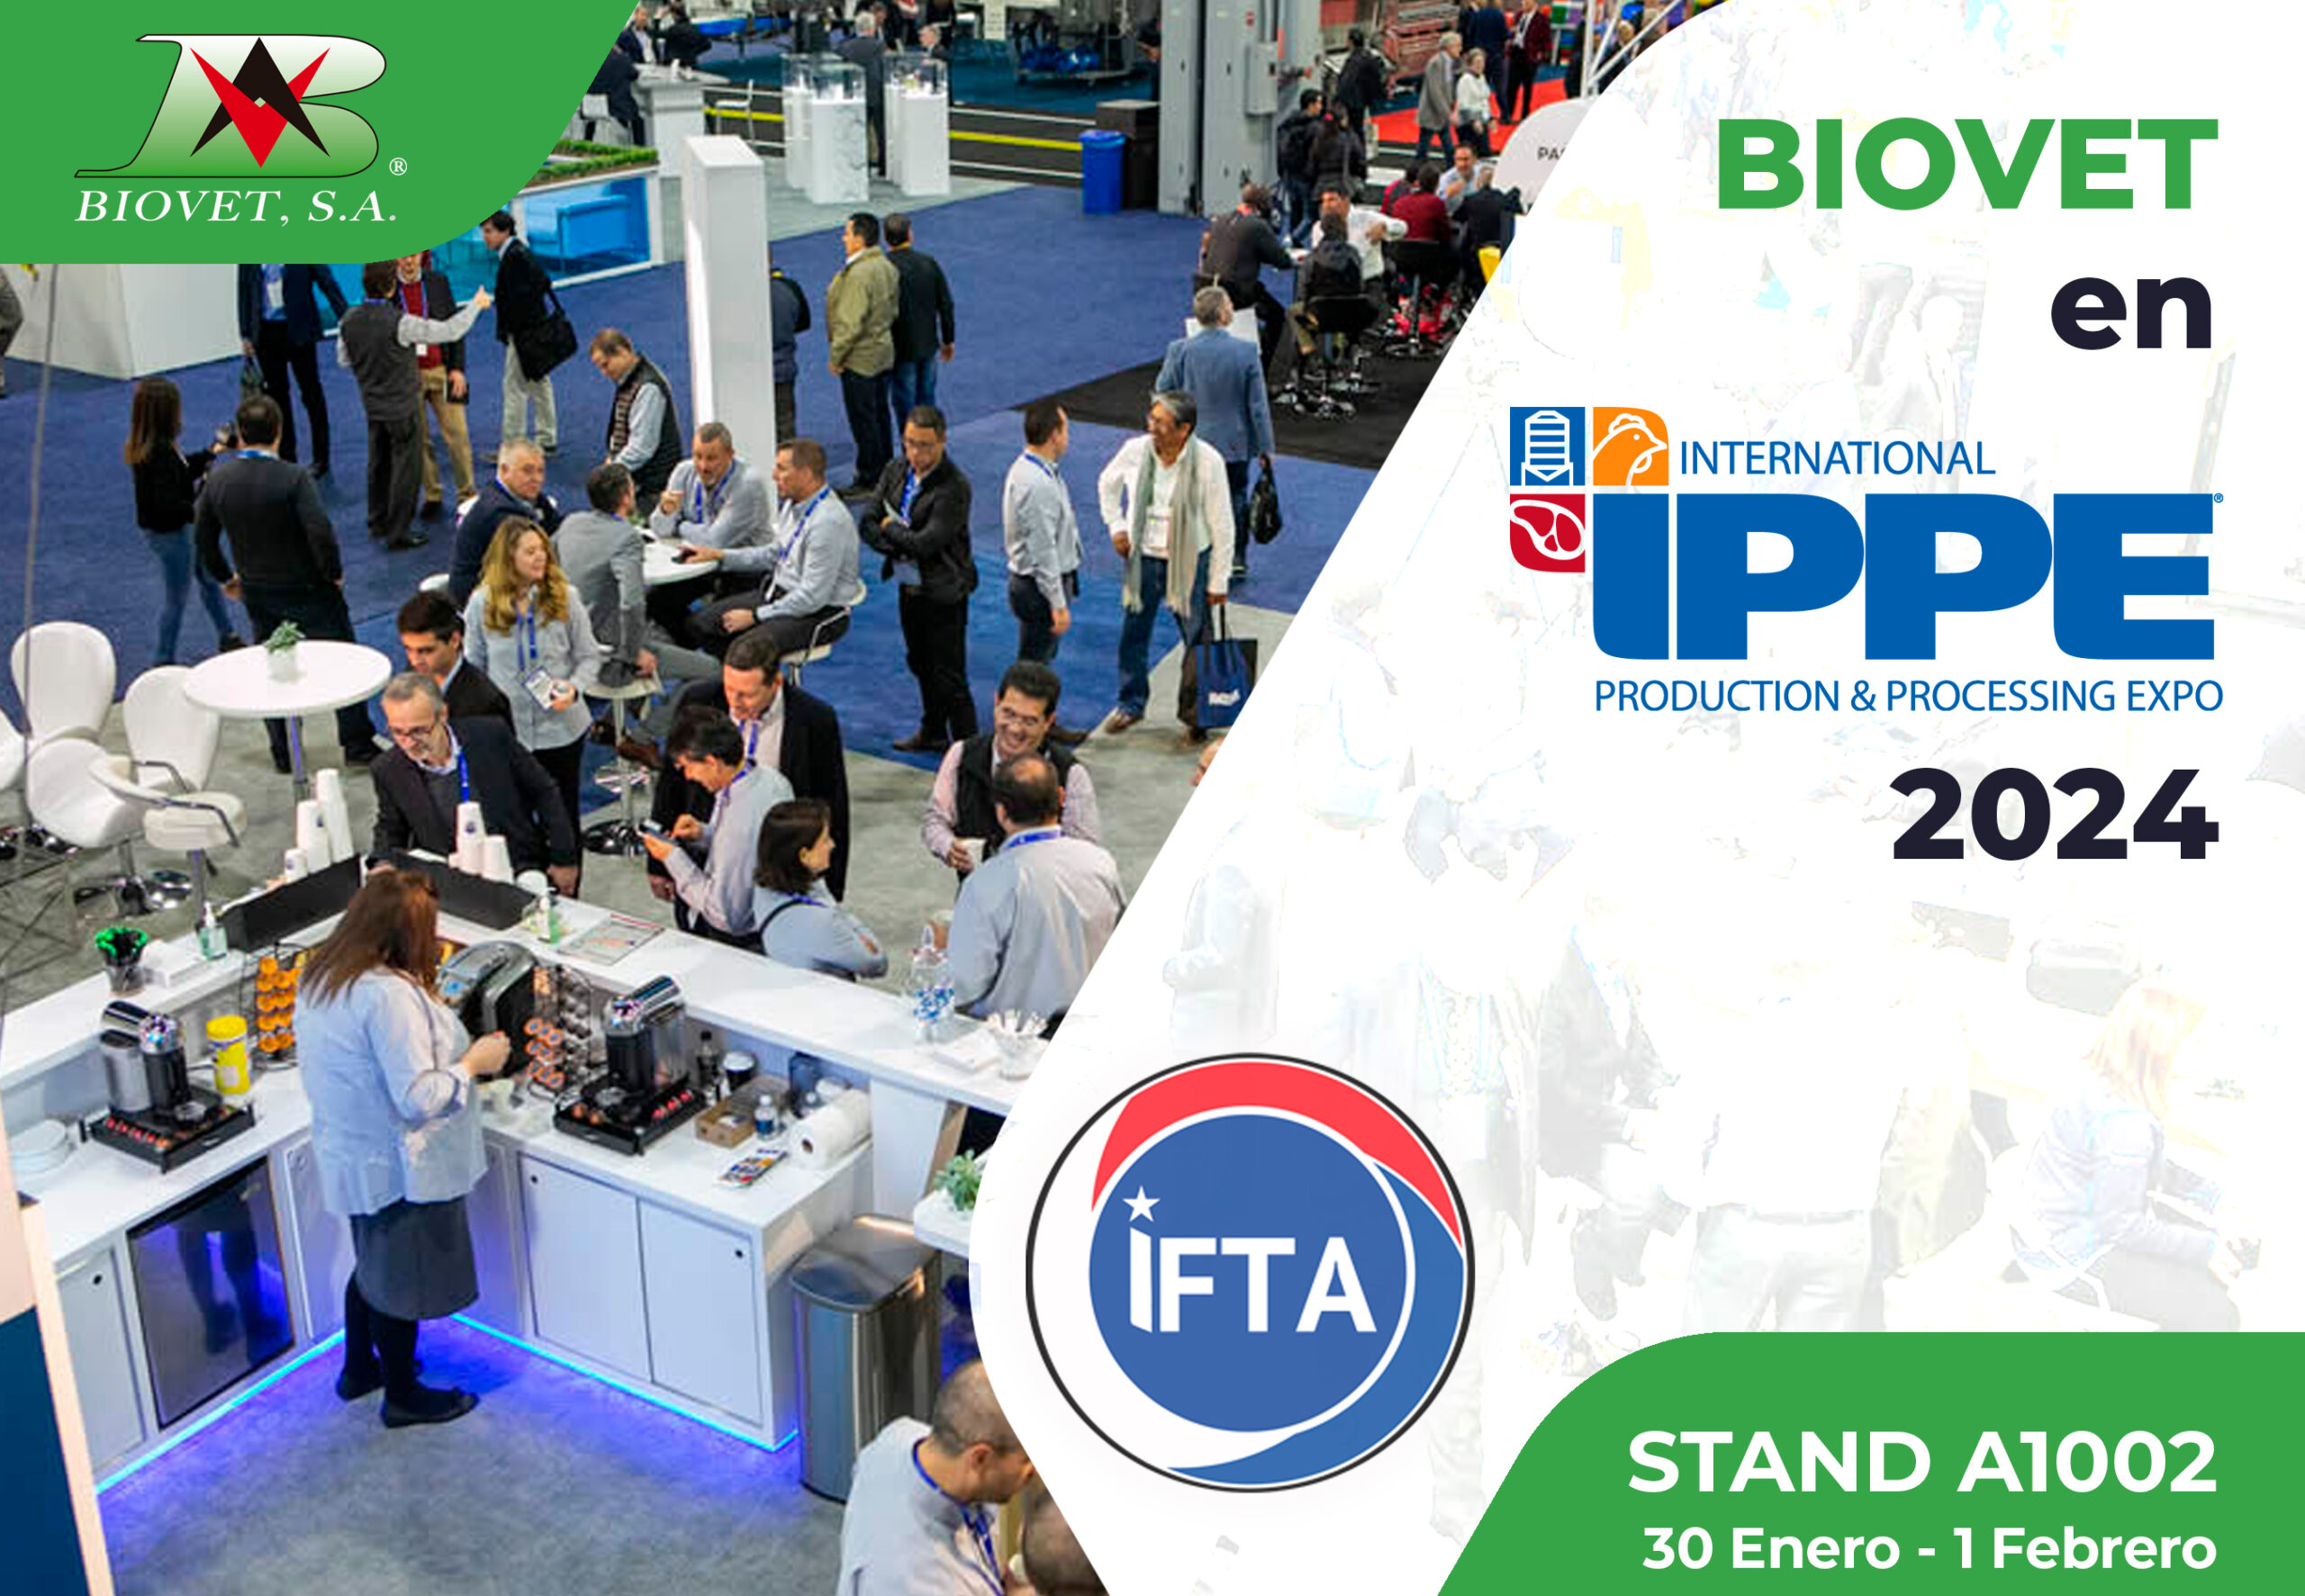 Biovet S.A. will participate in IPPE with its latest technologies and a scientific lecture